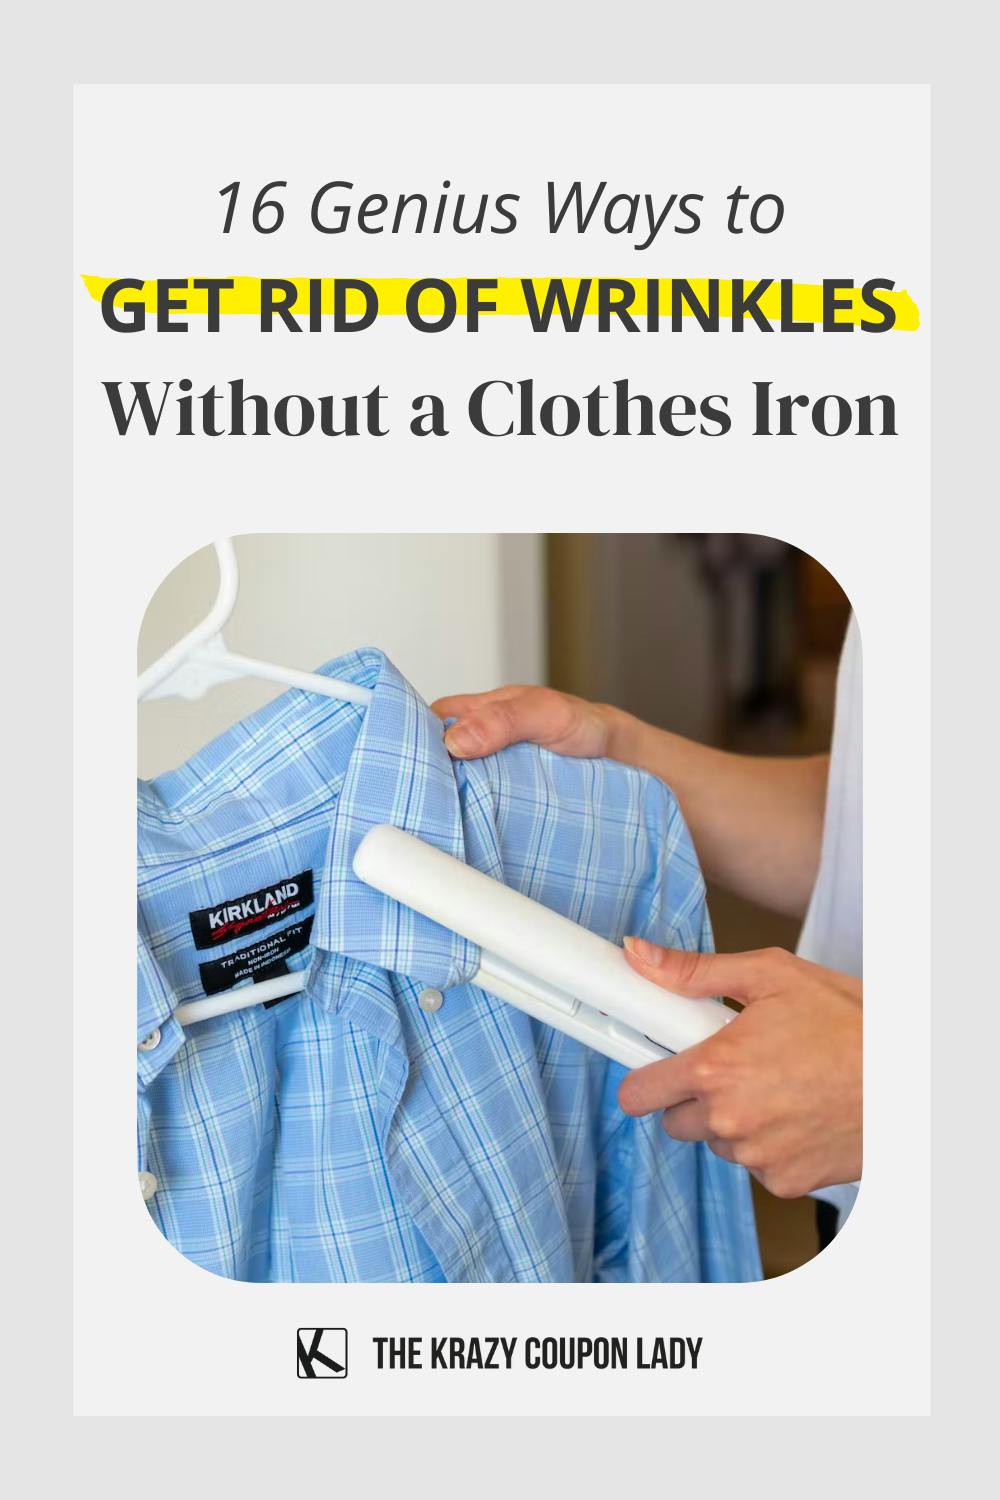 15 Genius Ways to Get Rid of Wrinkles Without a Clothes Iron